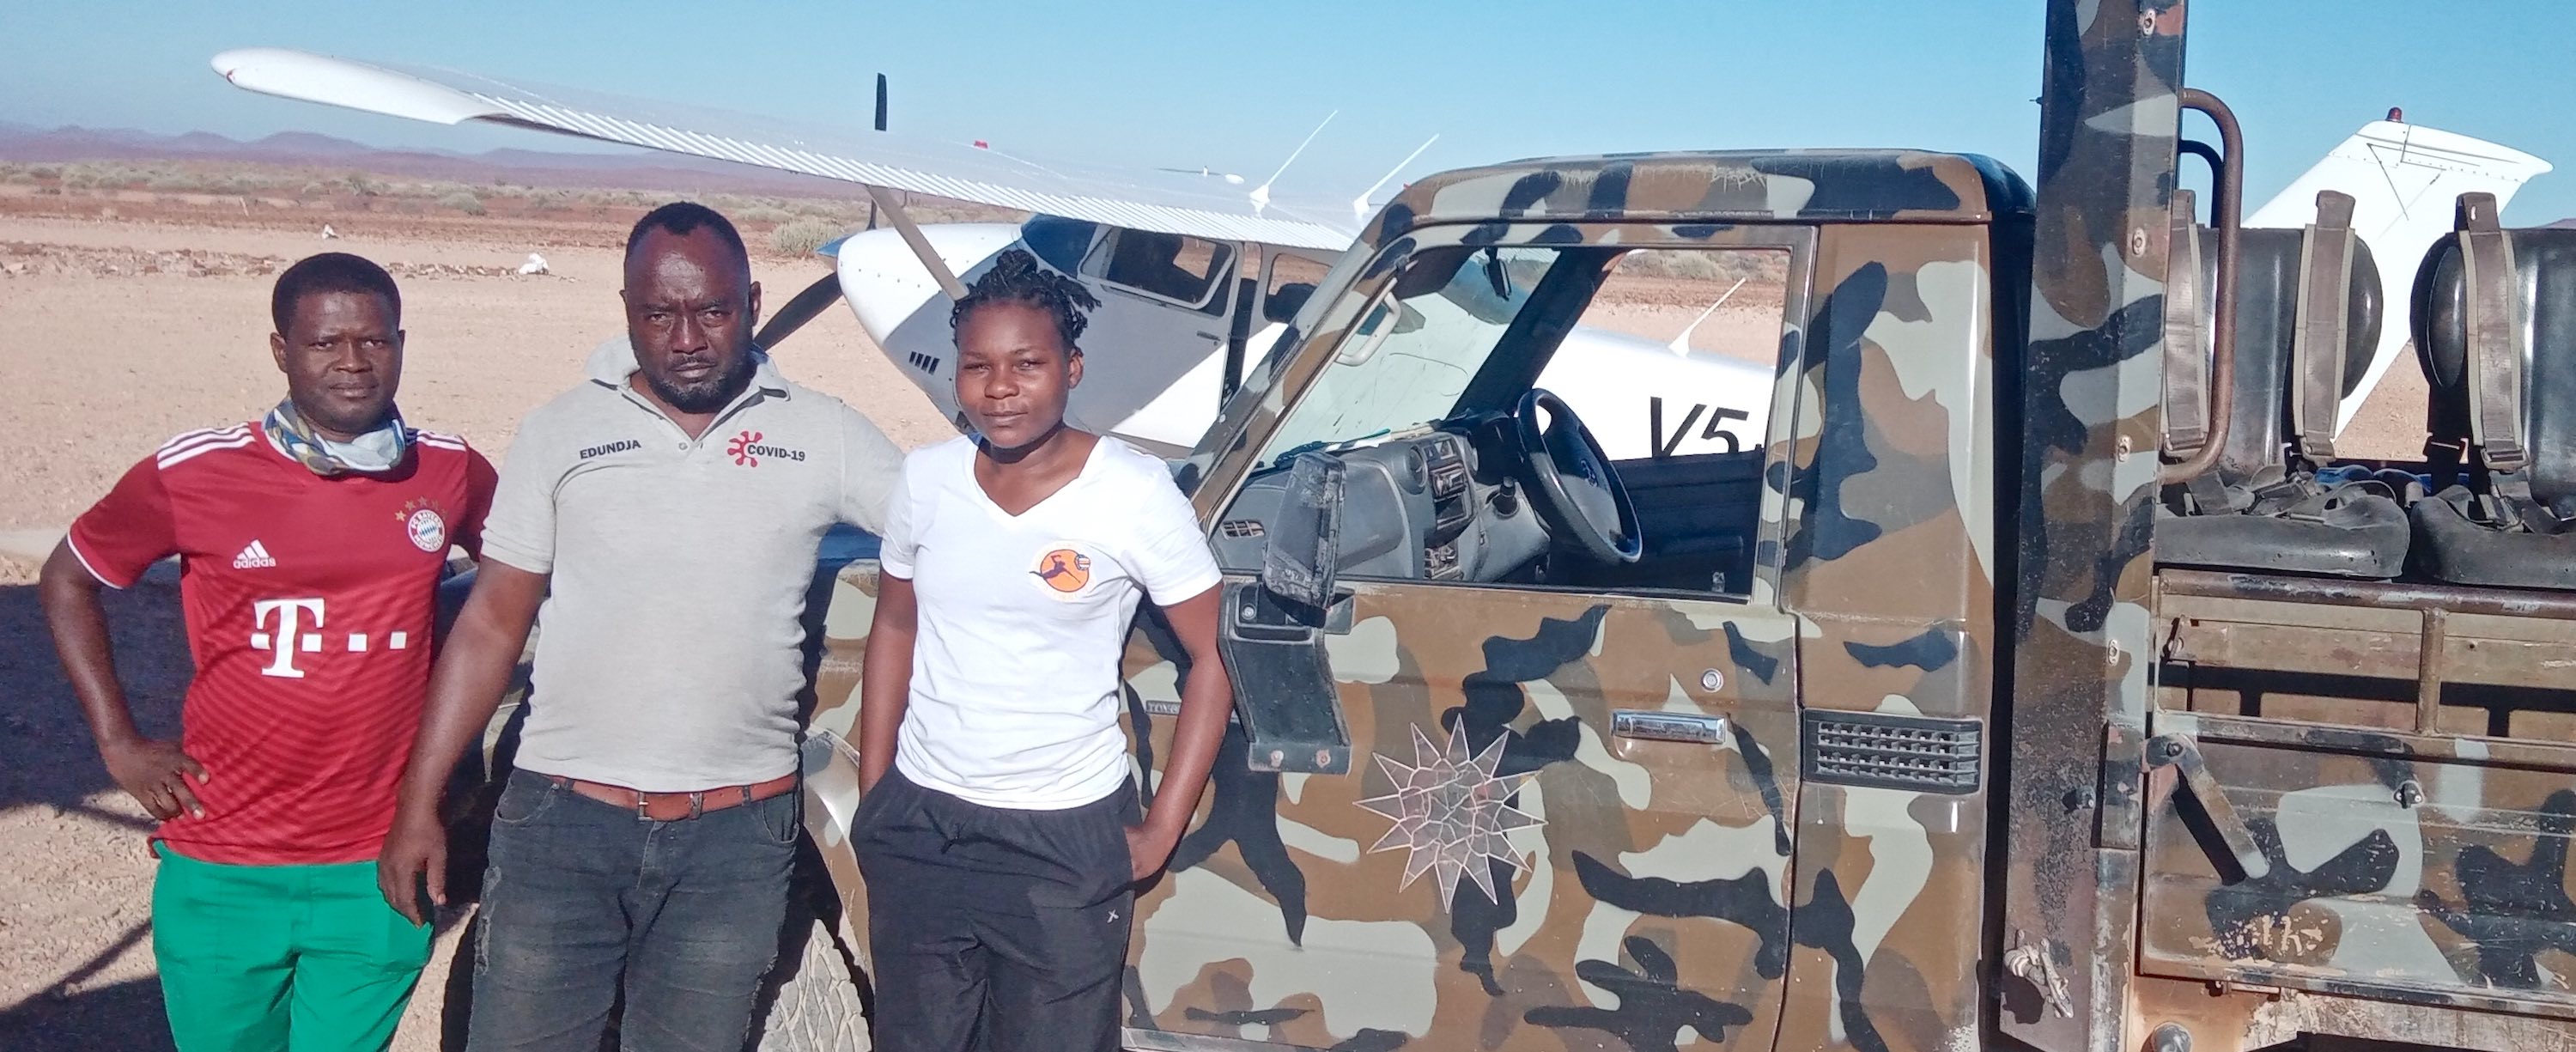 Three people, and a camo coloured vehicle in front of a plane.